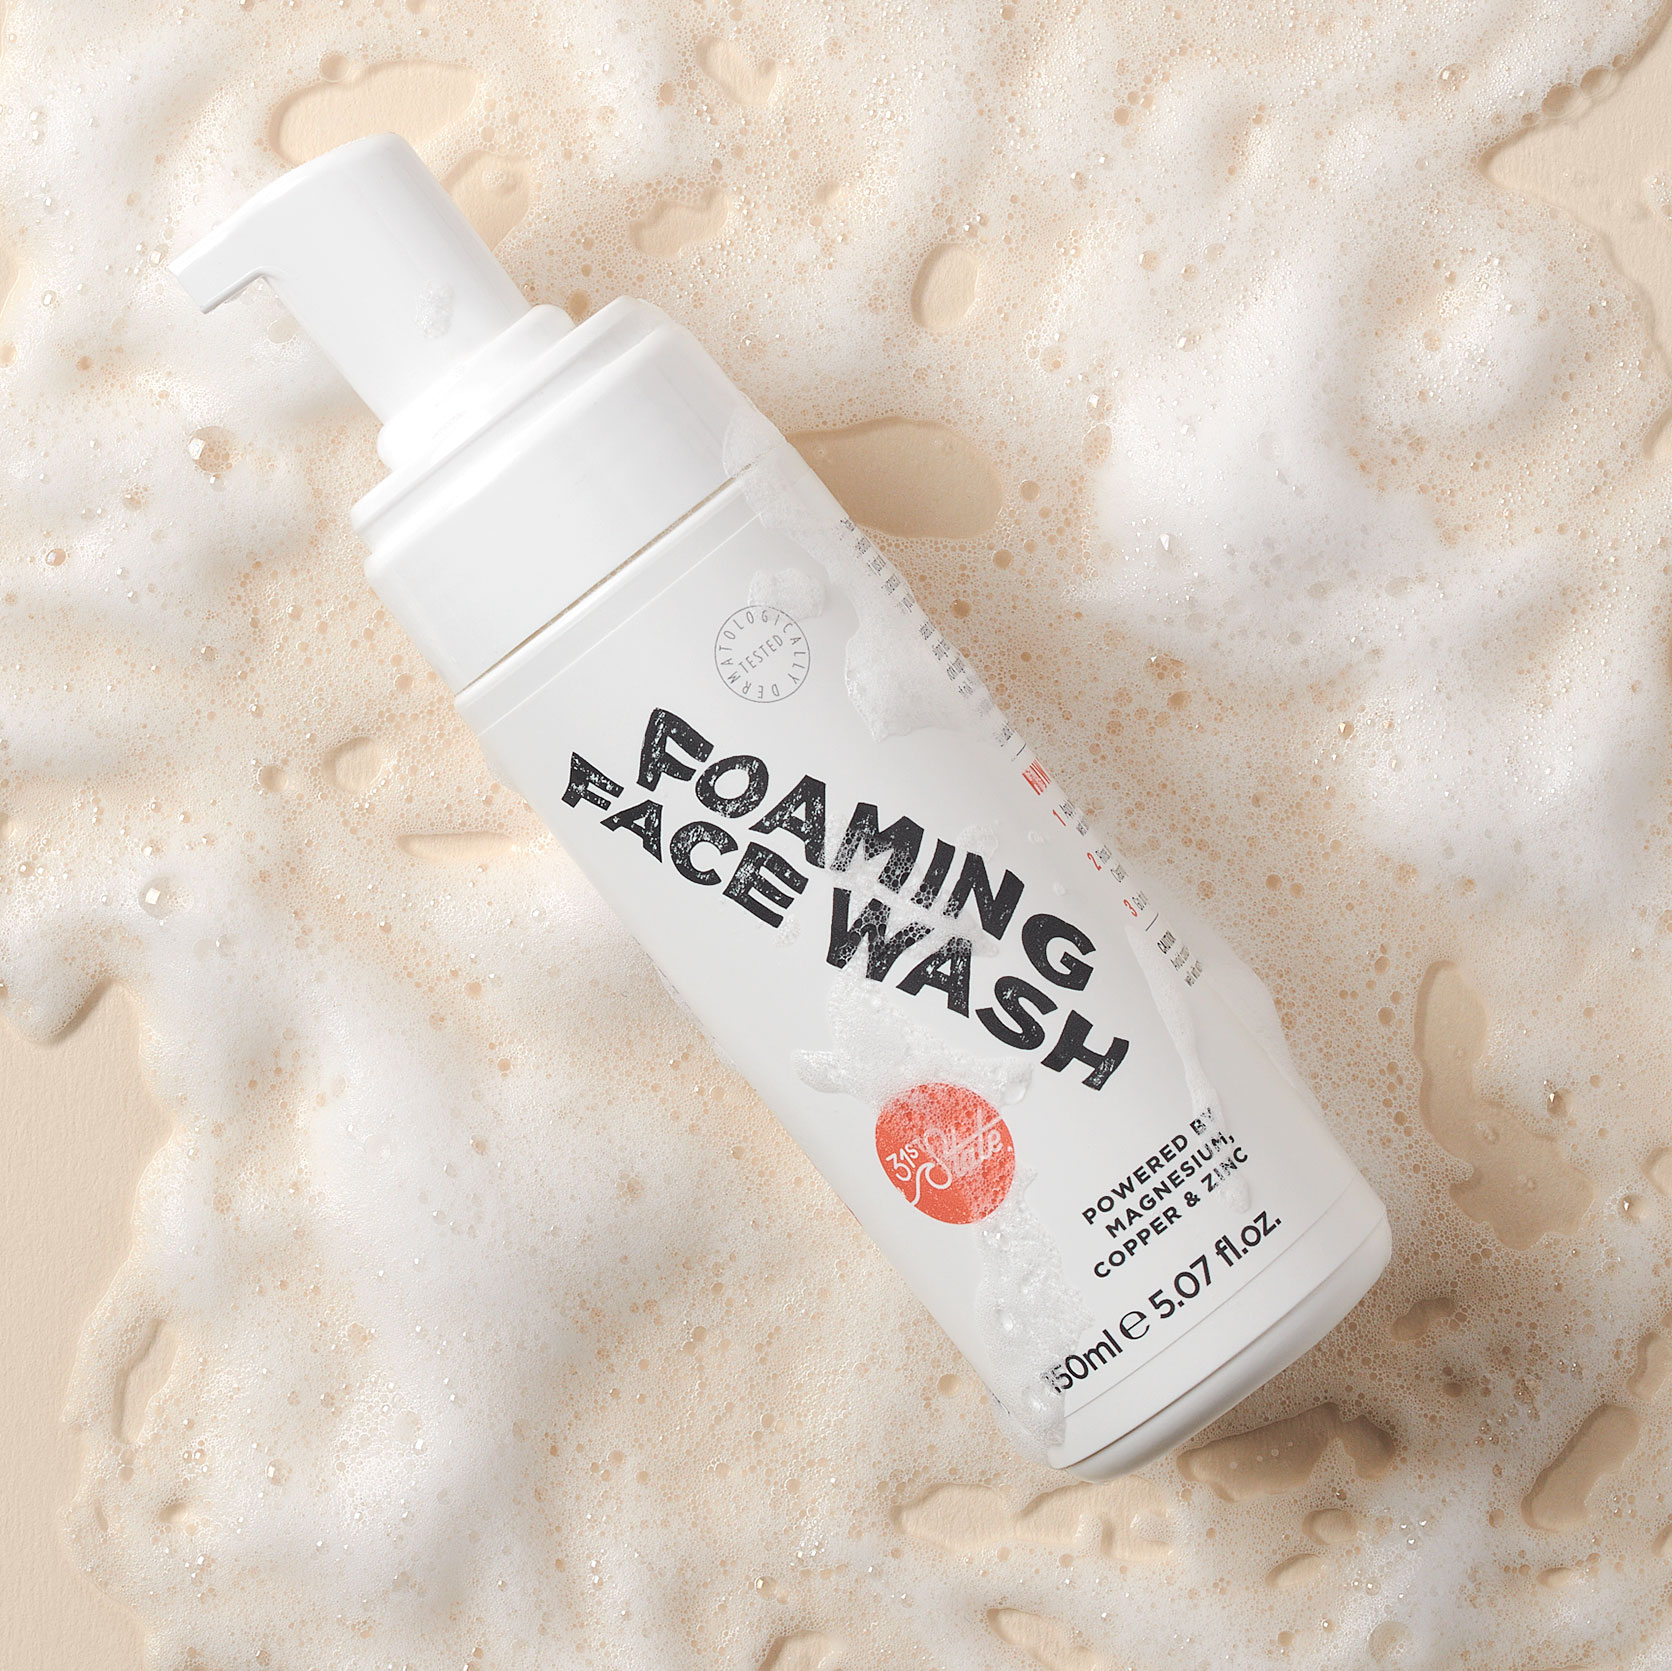 Foaming face wash covered in foam bubbles